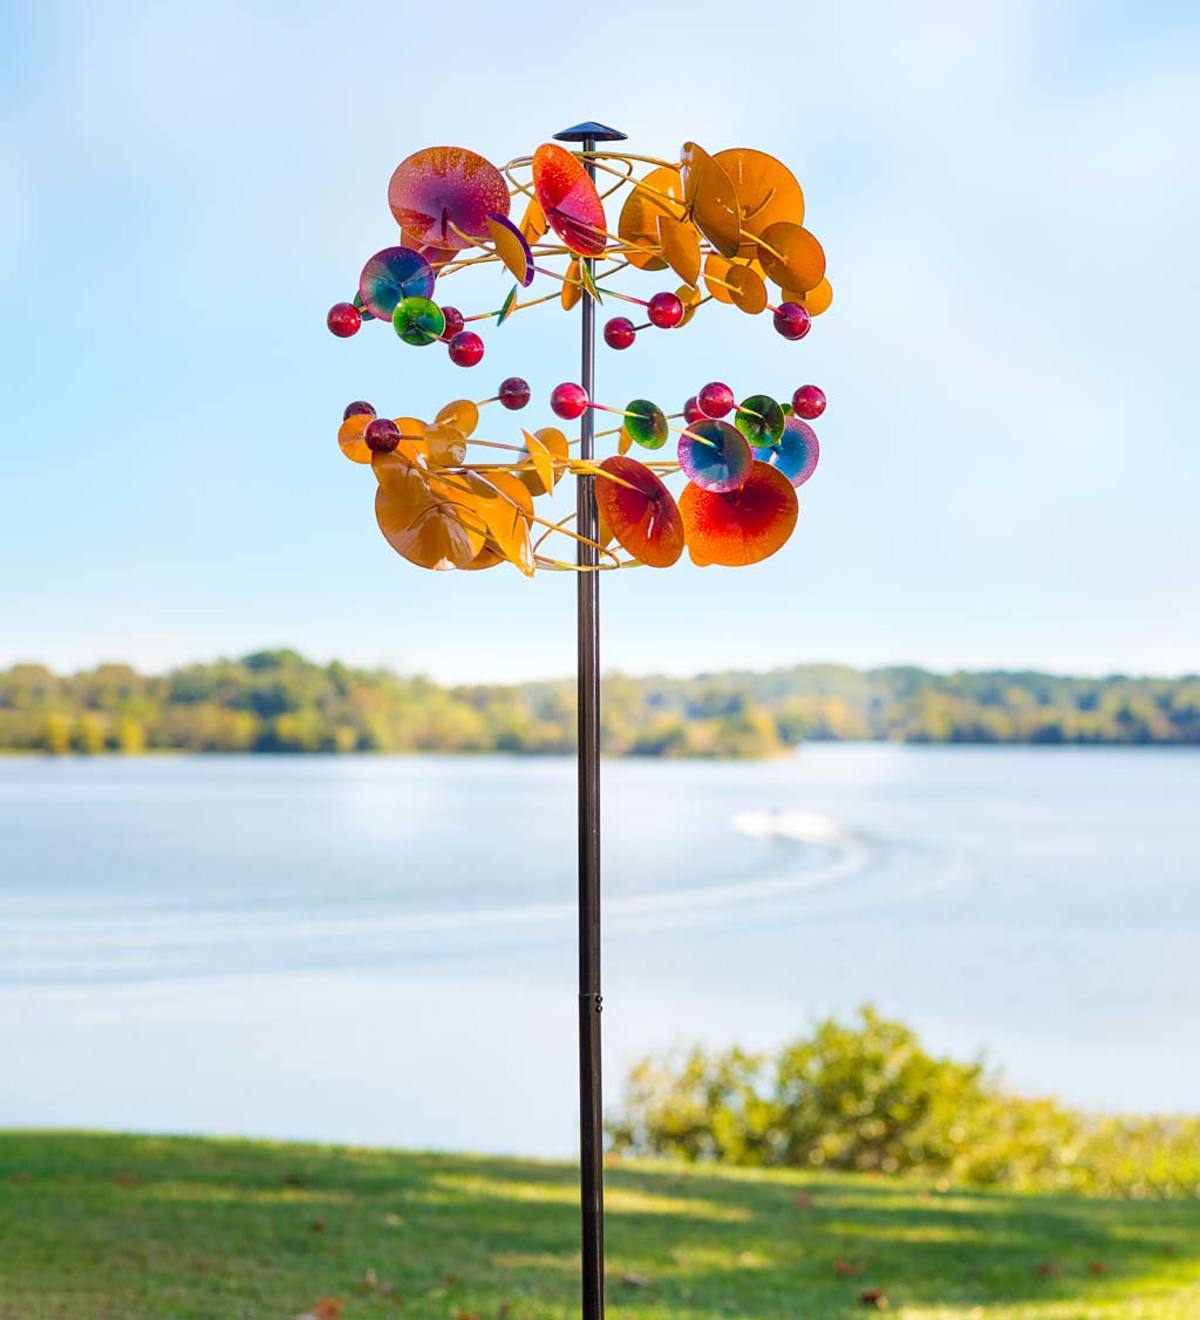 Two-Tier Multi-Colored Metal Mobile-Inspired Wind Spinner